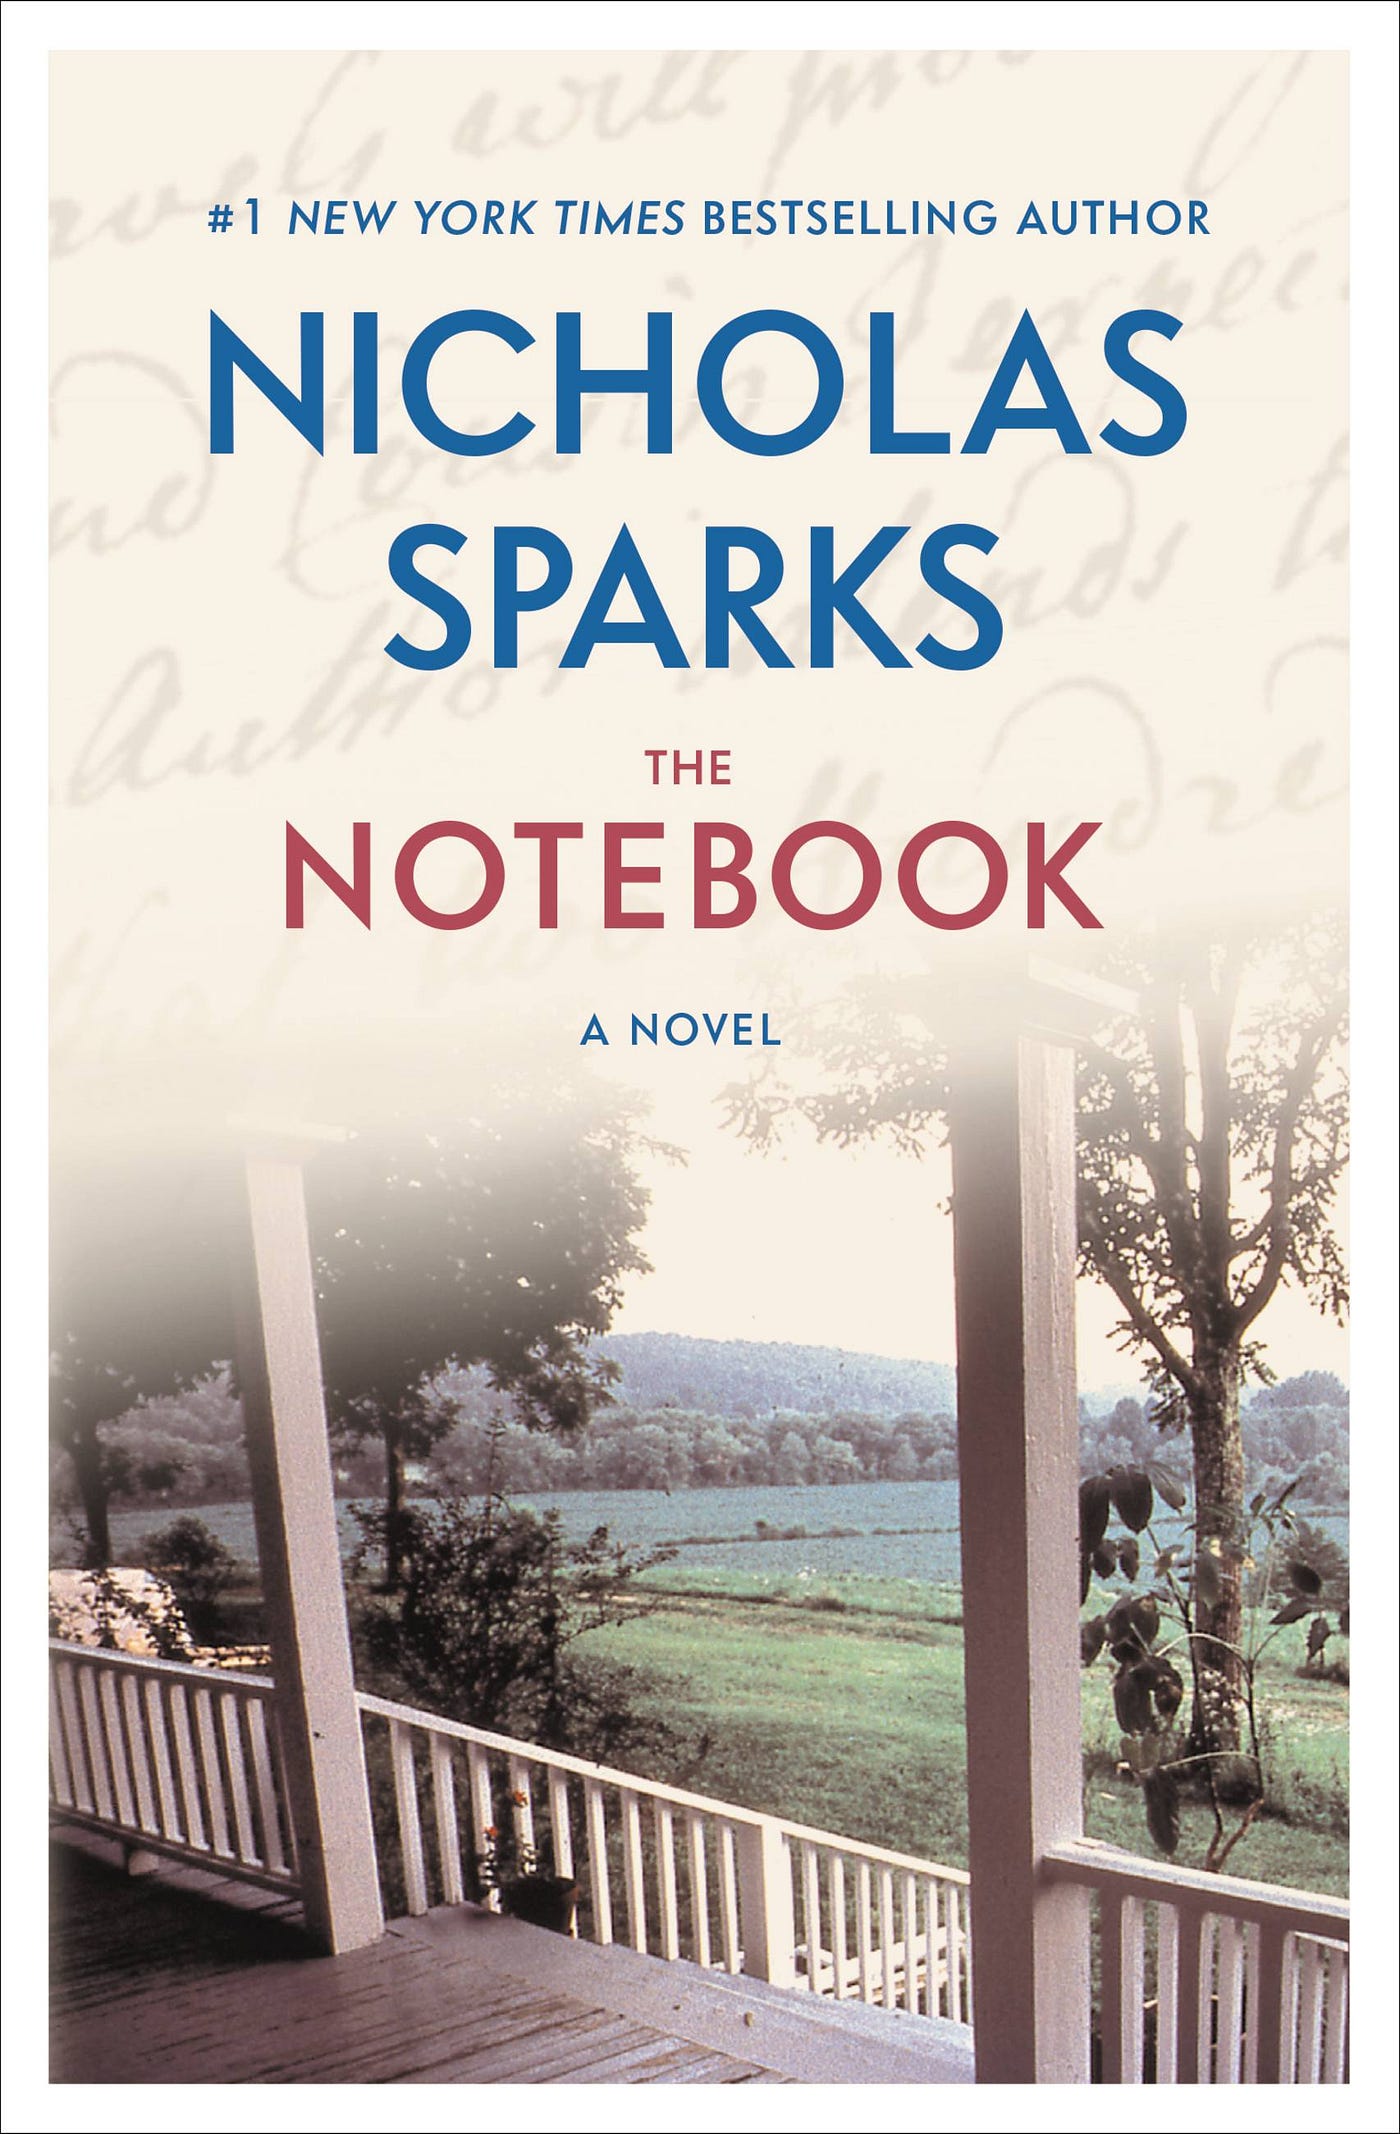 The Notebook by Nicholas Sparks (Summary without a spoiler) | by Simran